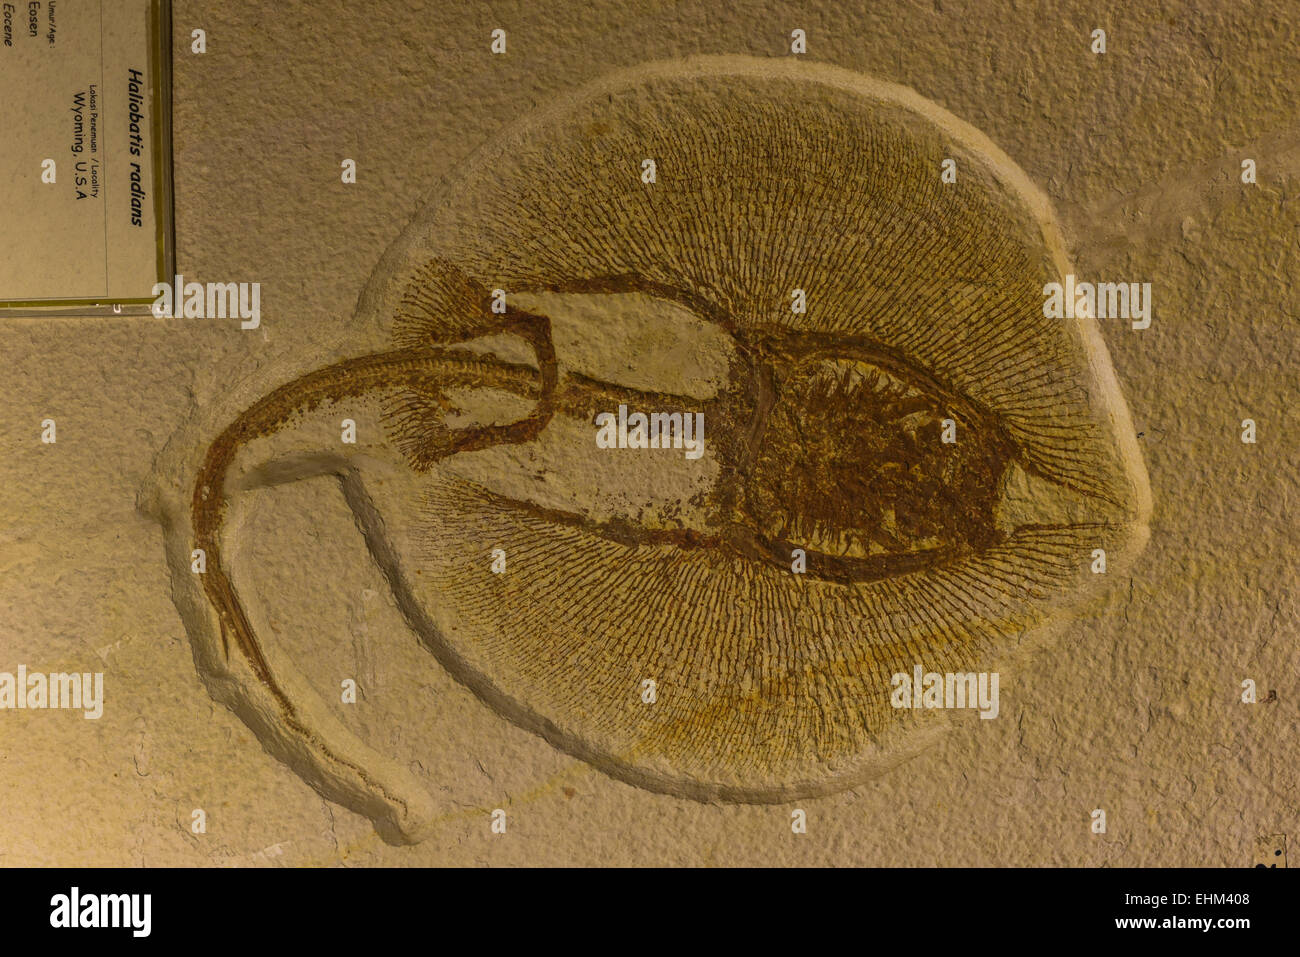 Heliobatis radians fossil found in Wyoming, USA, being displayed at Geology Museum, Bandung, Indonesia. Stock Photo